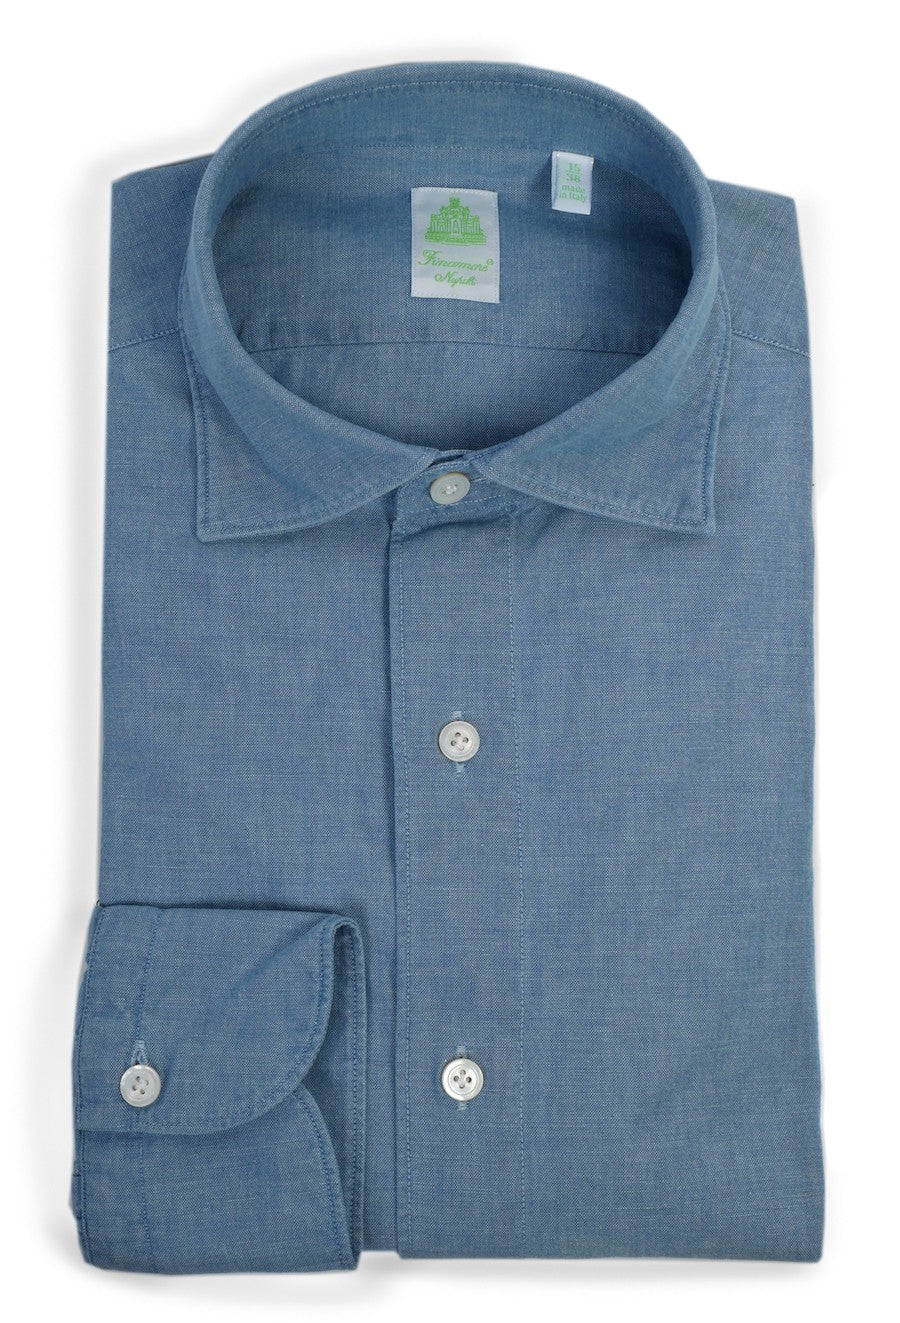 Chambray tailored shirt from the Gaeta line